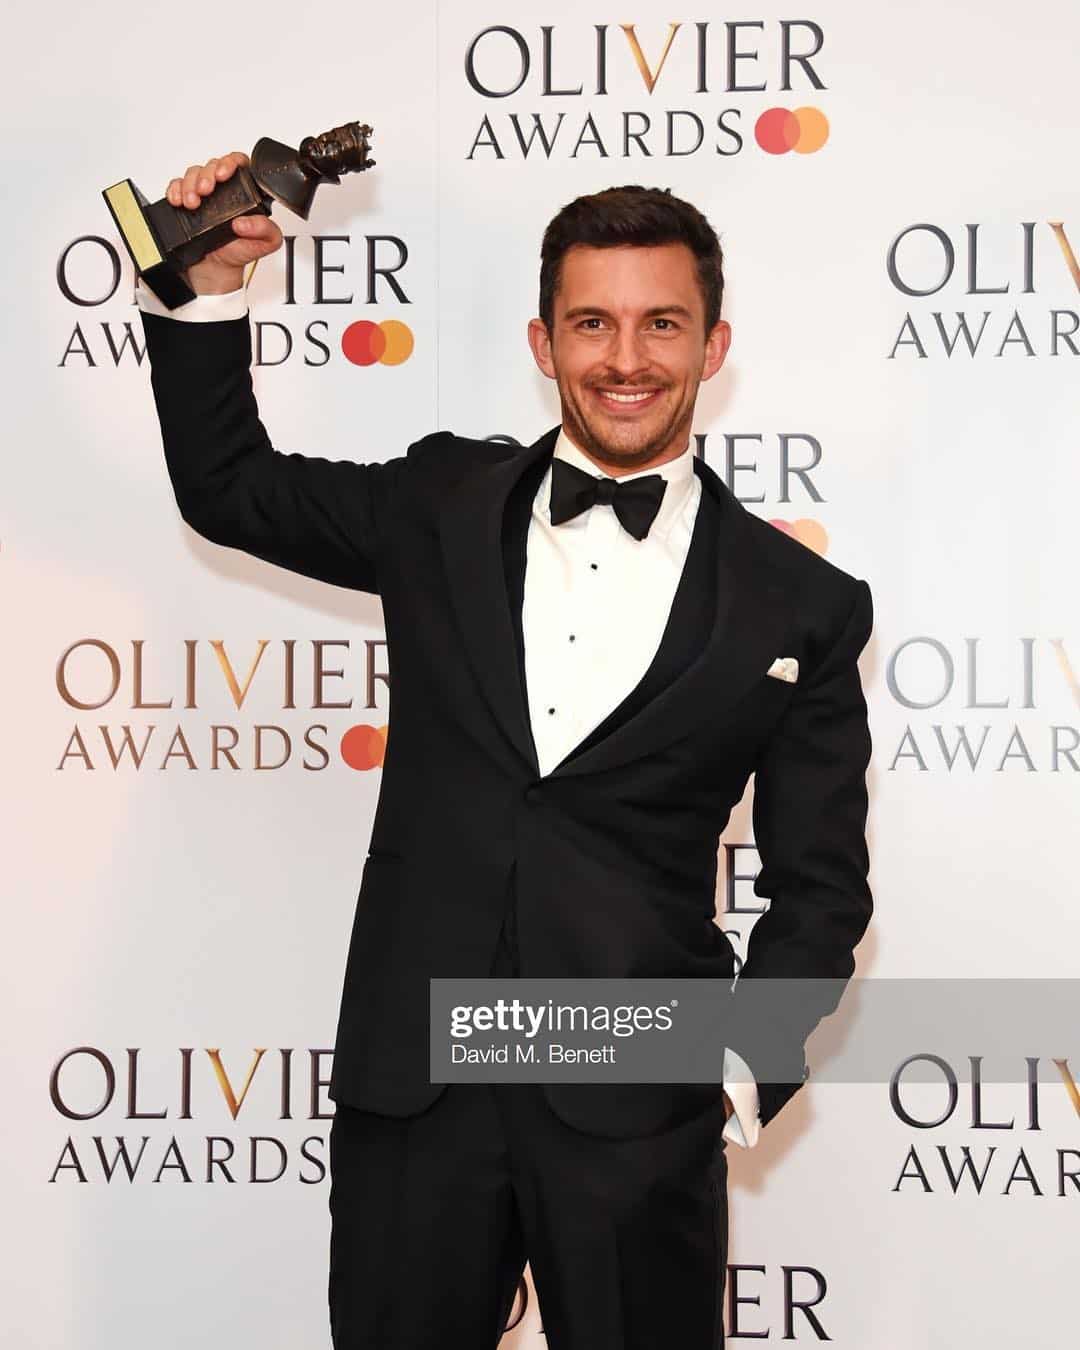 From last night’s #OlivierAwards: Huge congratulations to Jonathan Bailey @jbayleaf who won the Olivier for ‘Best Supporting Actor in a Musical’ for his role in @companywestend.